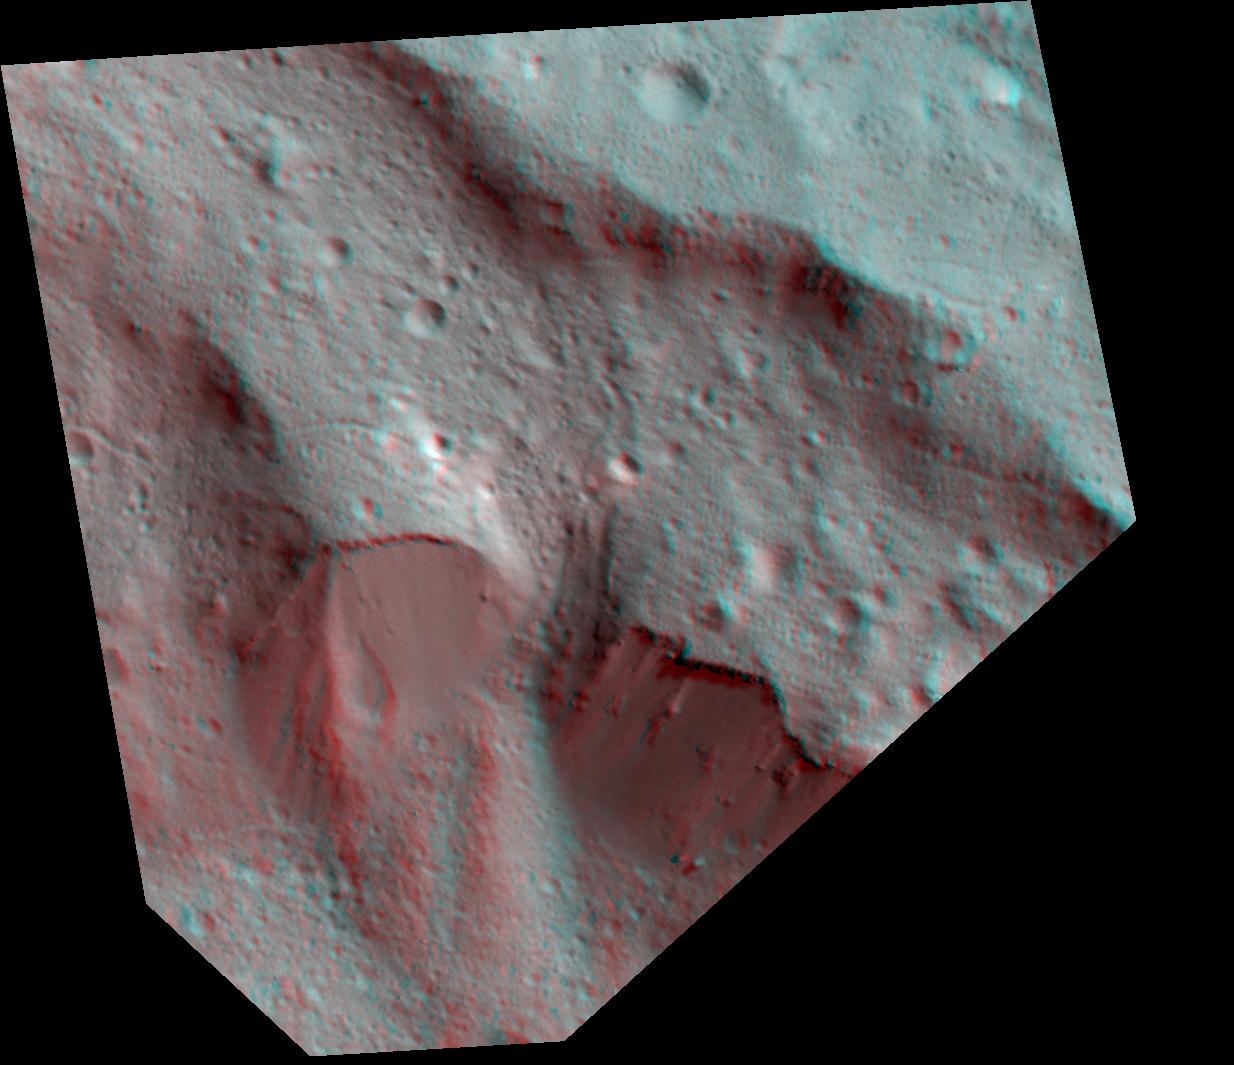 PIA24064: Dawn Stereo Anaglyph of Impact Melt Deposits at Occator Crater, Ceres